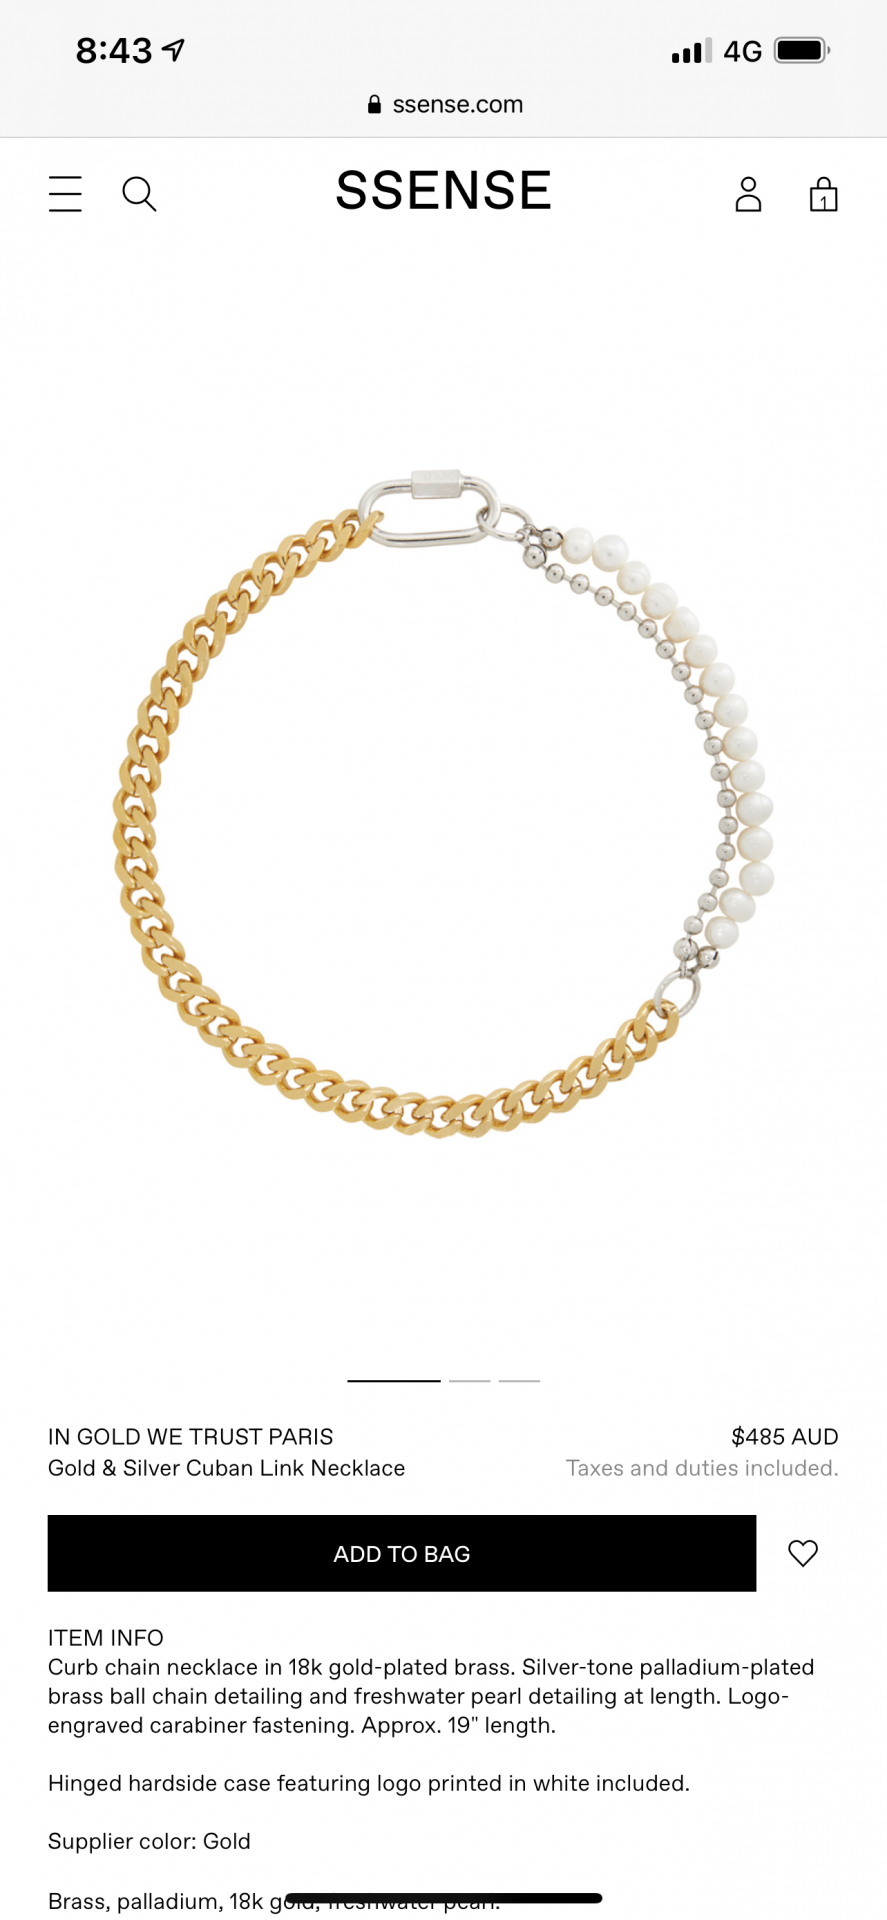 In gold we trust gold & silver Cuban necklace